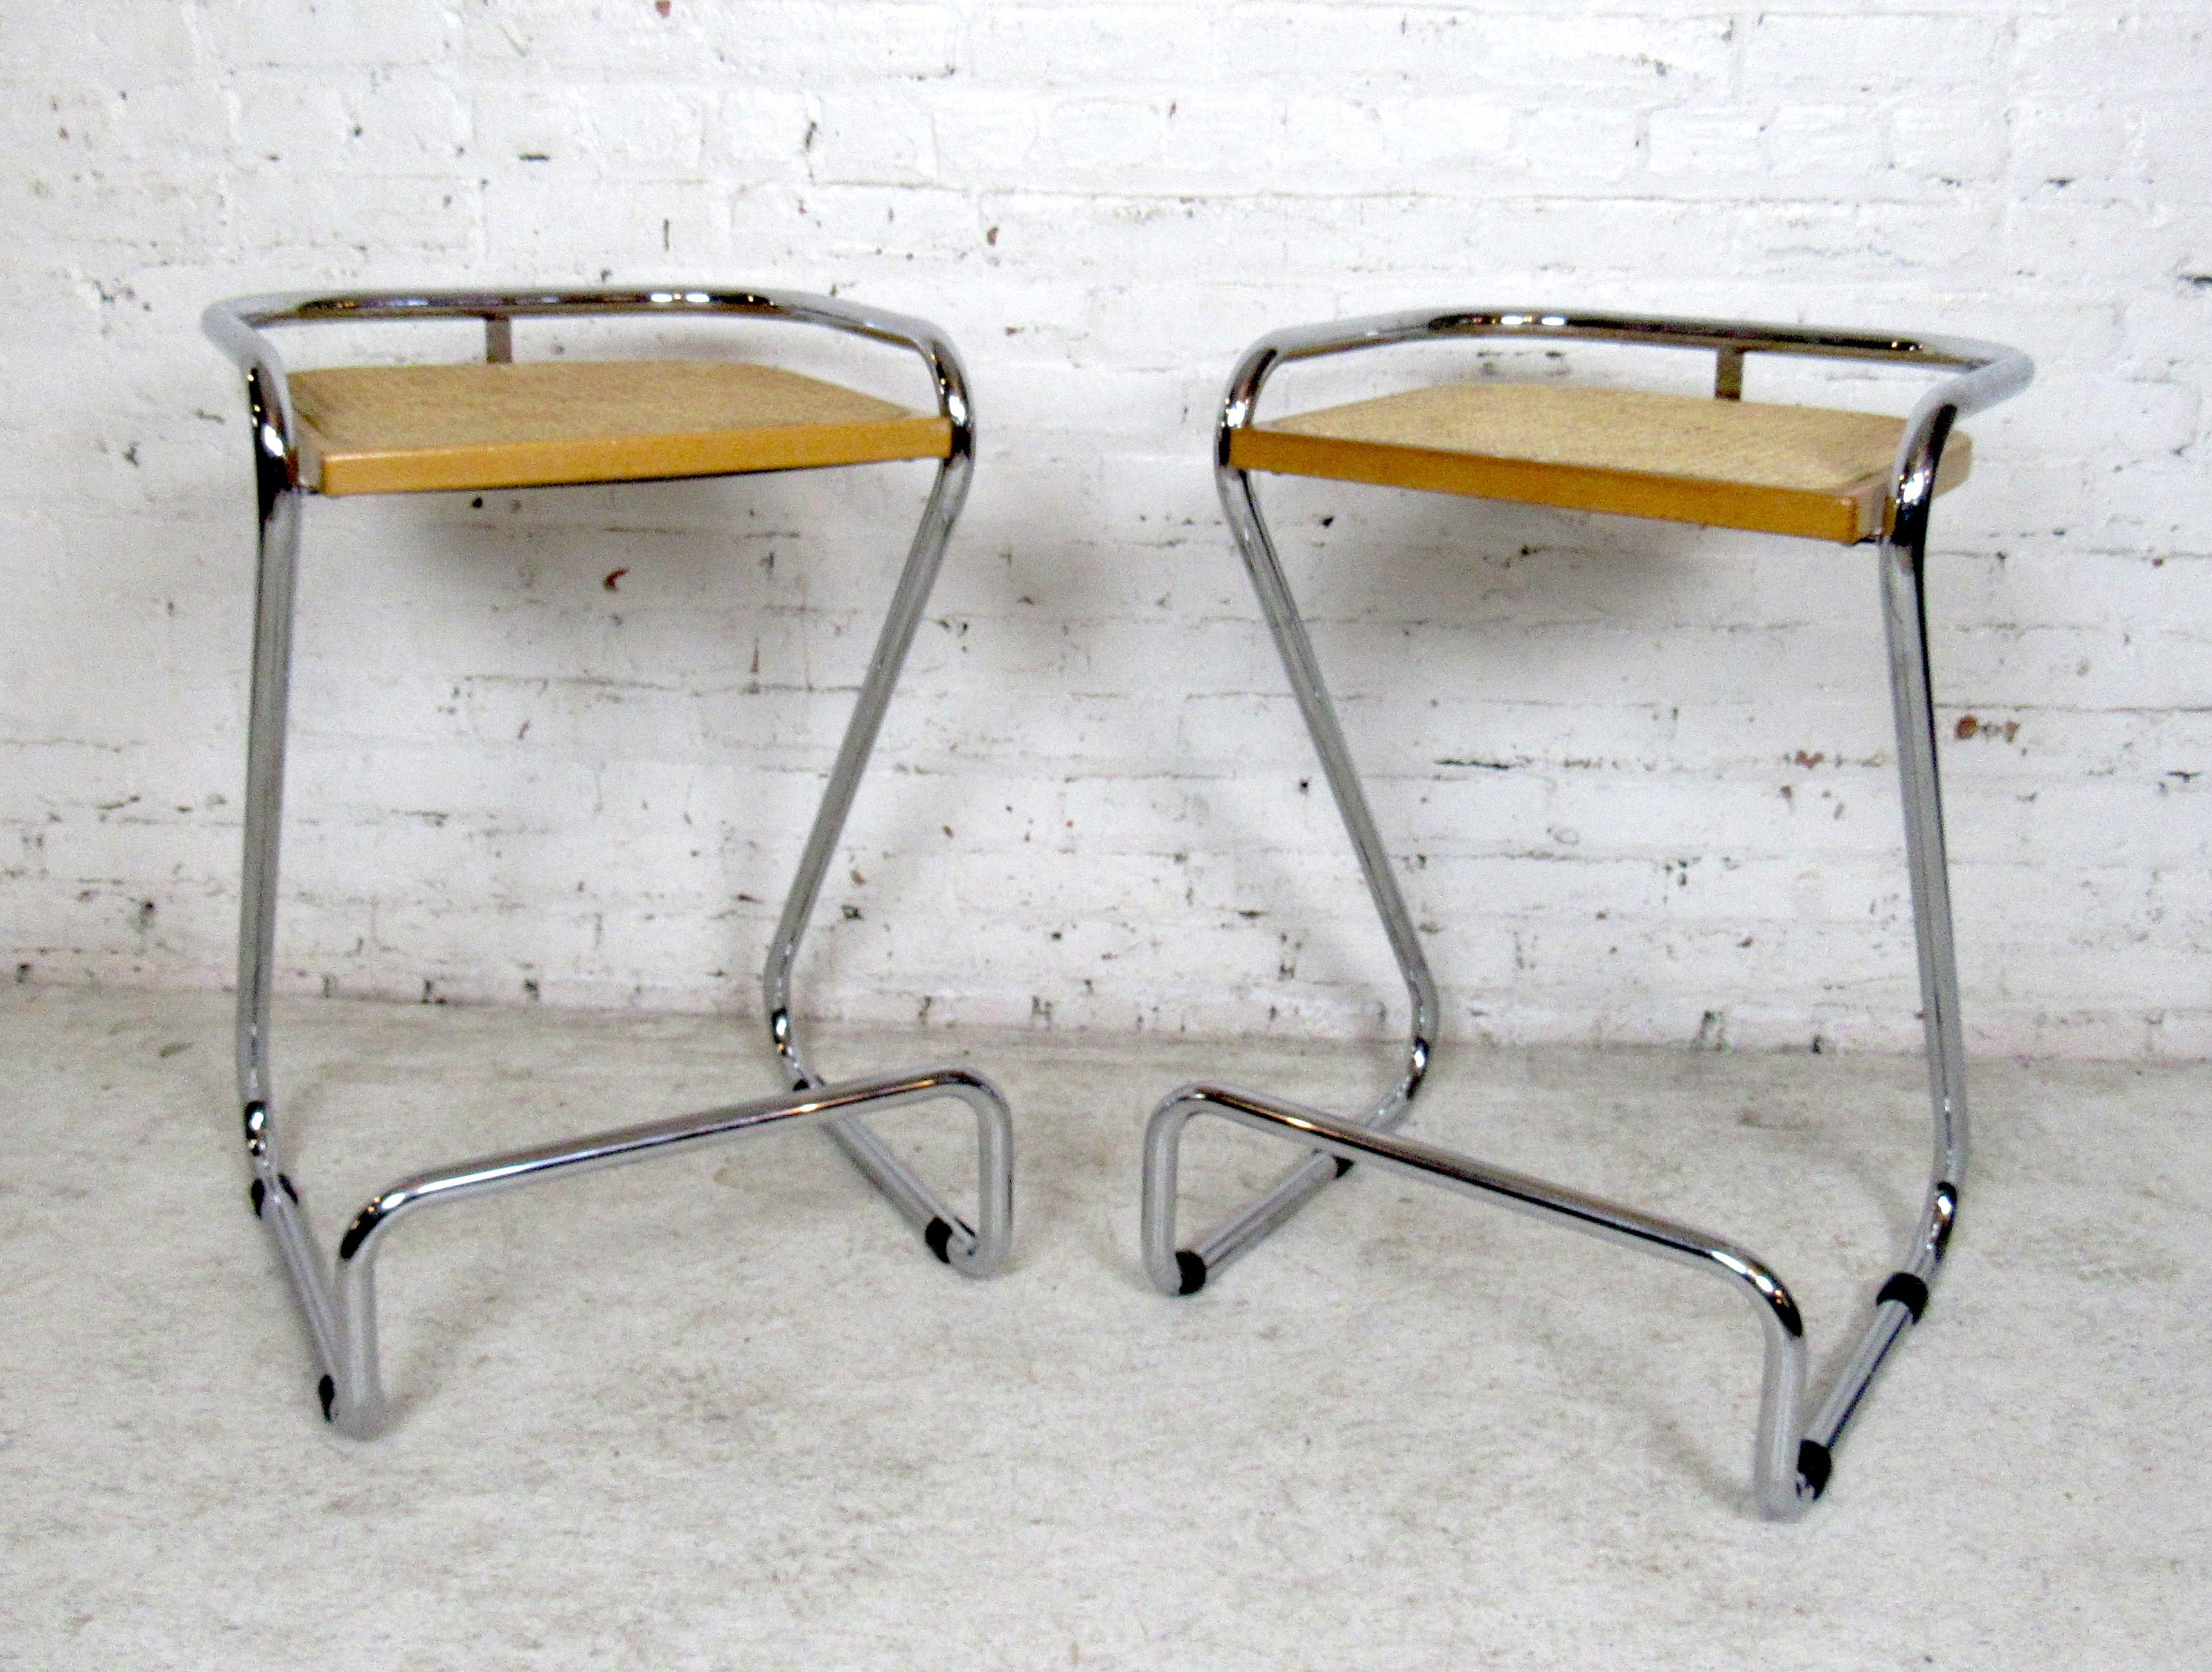 Gorgeous pair of Mid-Century Modern stools featured in a chrome frame and rattan seating, made in Italy. 

(Please confirm item location - NY or NJ - with dealer).